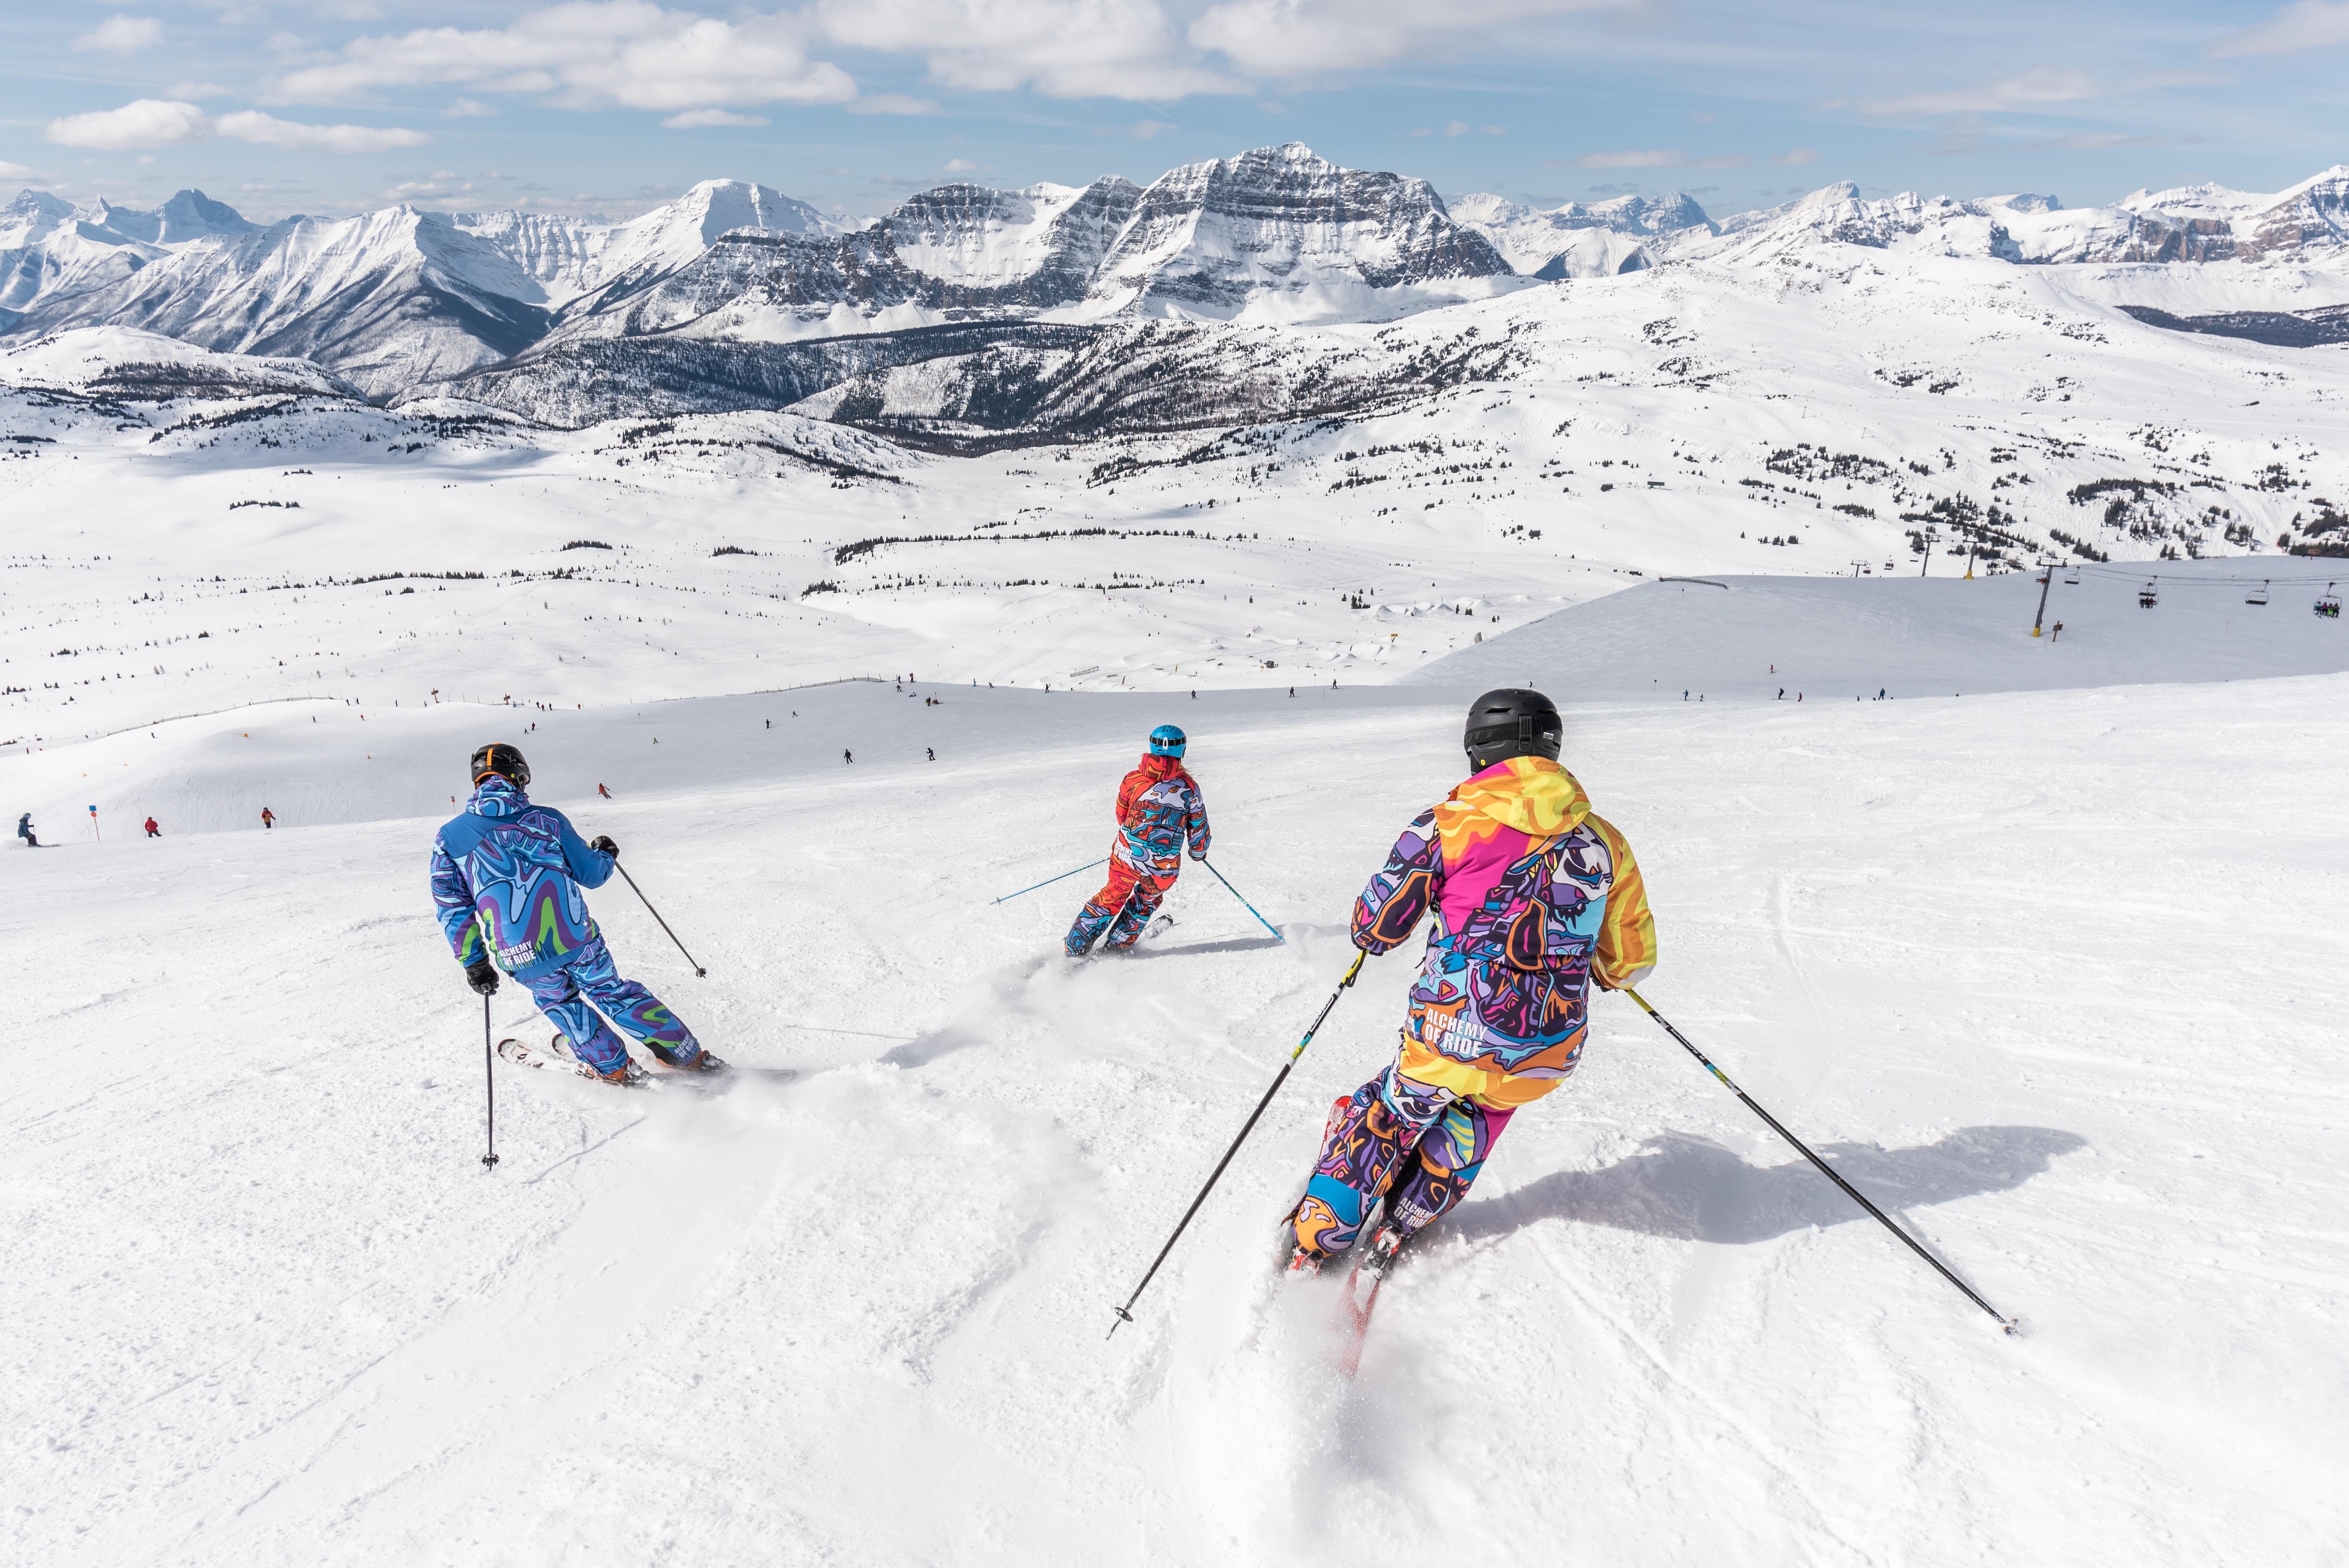 How To Plan A Ski Trip For The First Time